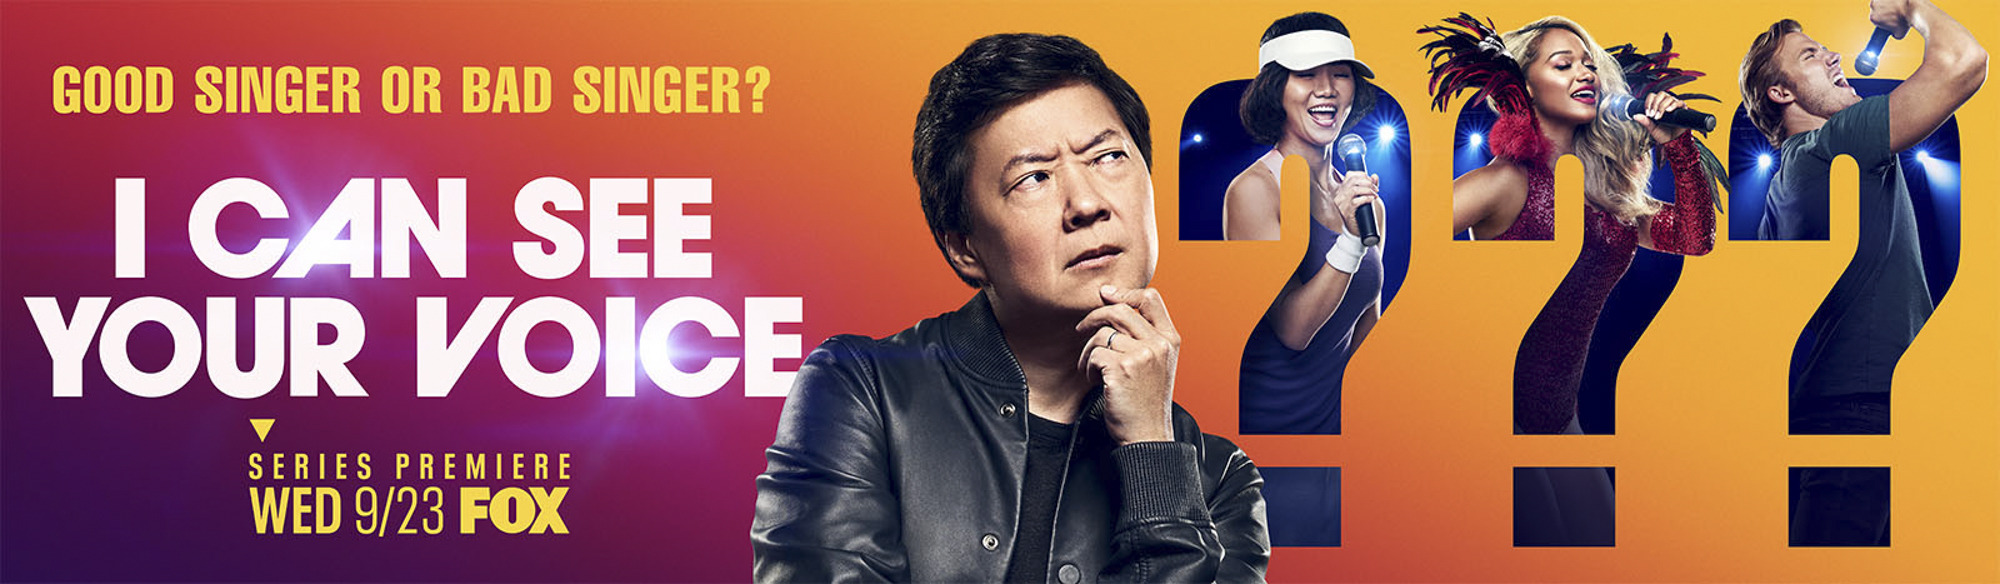 Mega Sized TV Poster Image for I Can See Your Voice (#3 of 5)